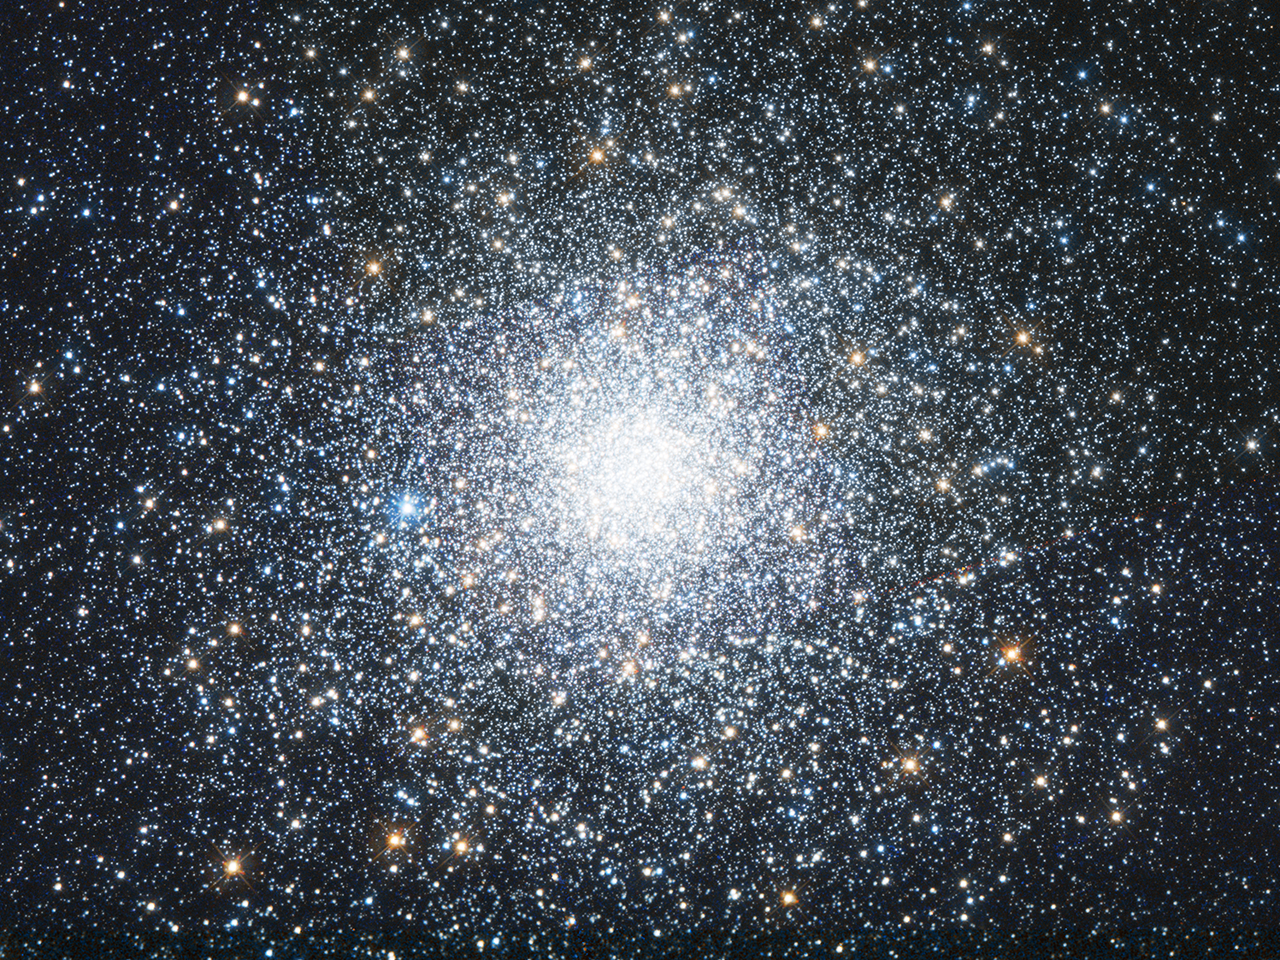 A bright cluster of white and orange stars, concentrated more densely at the center.